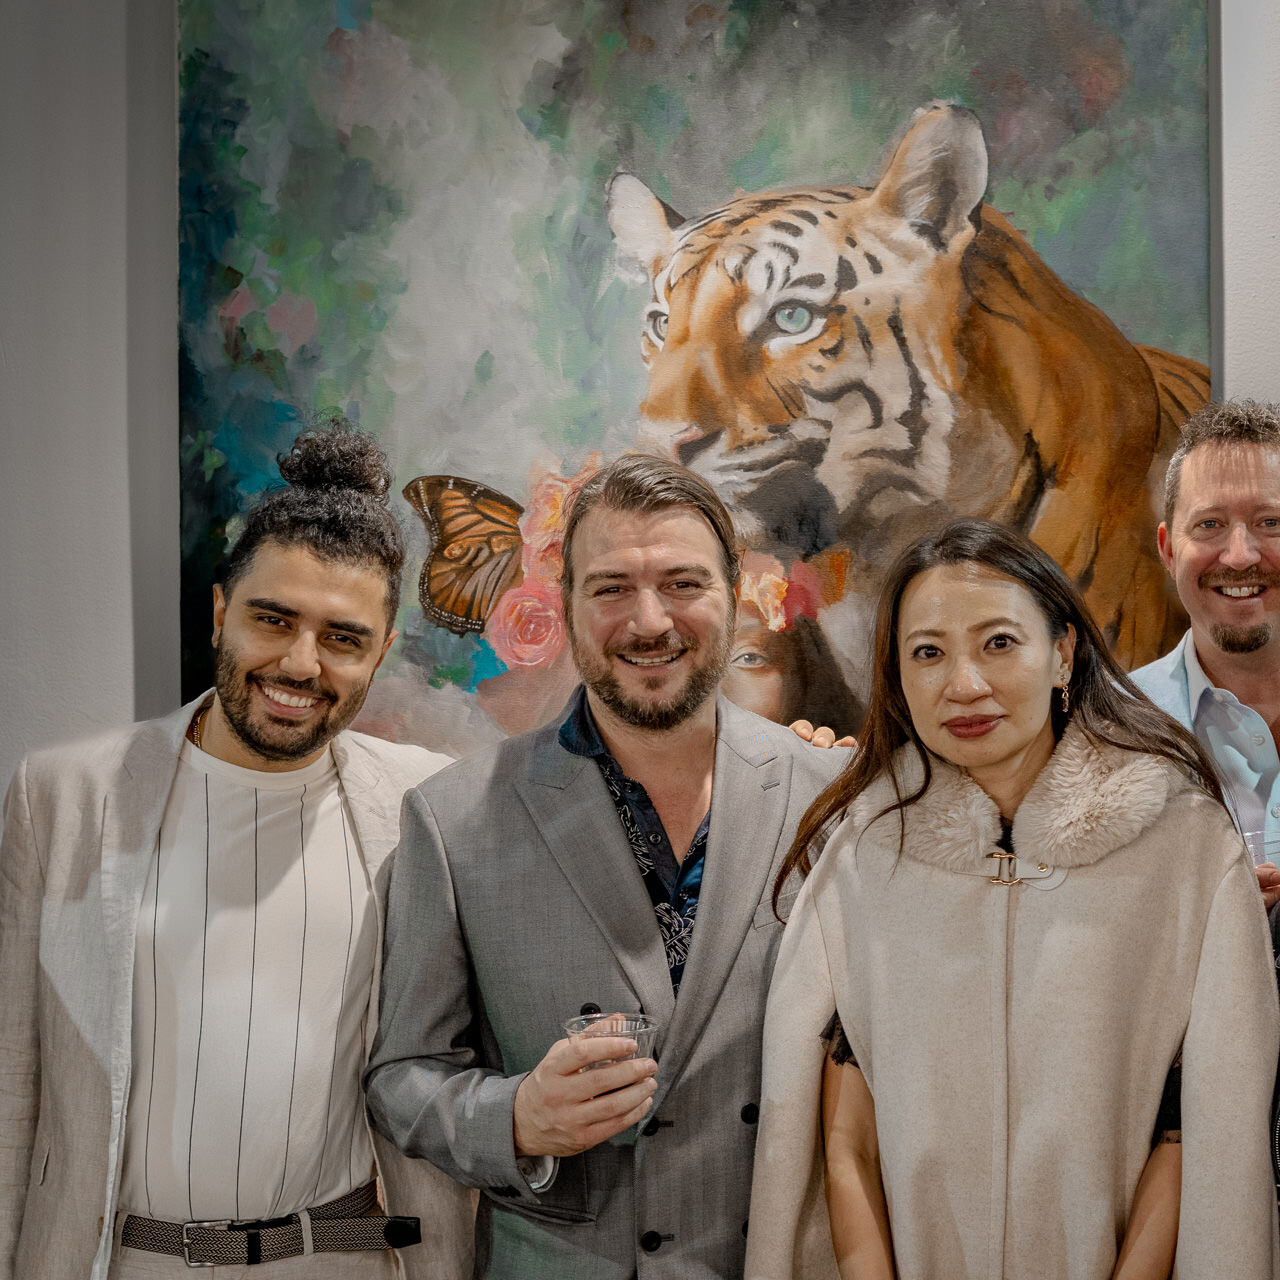 A group of happy art collectors pose with artist Alex Righetto at Spectrum Miami, with 'The Guardian' painting in the background.